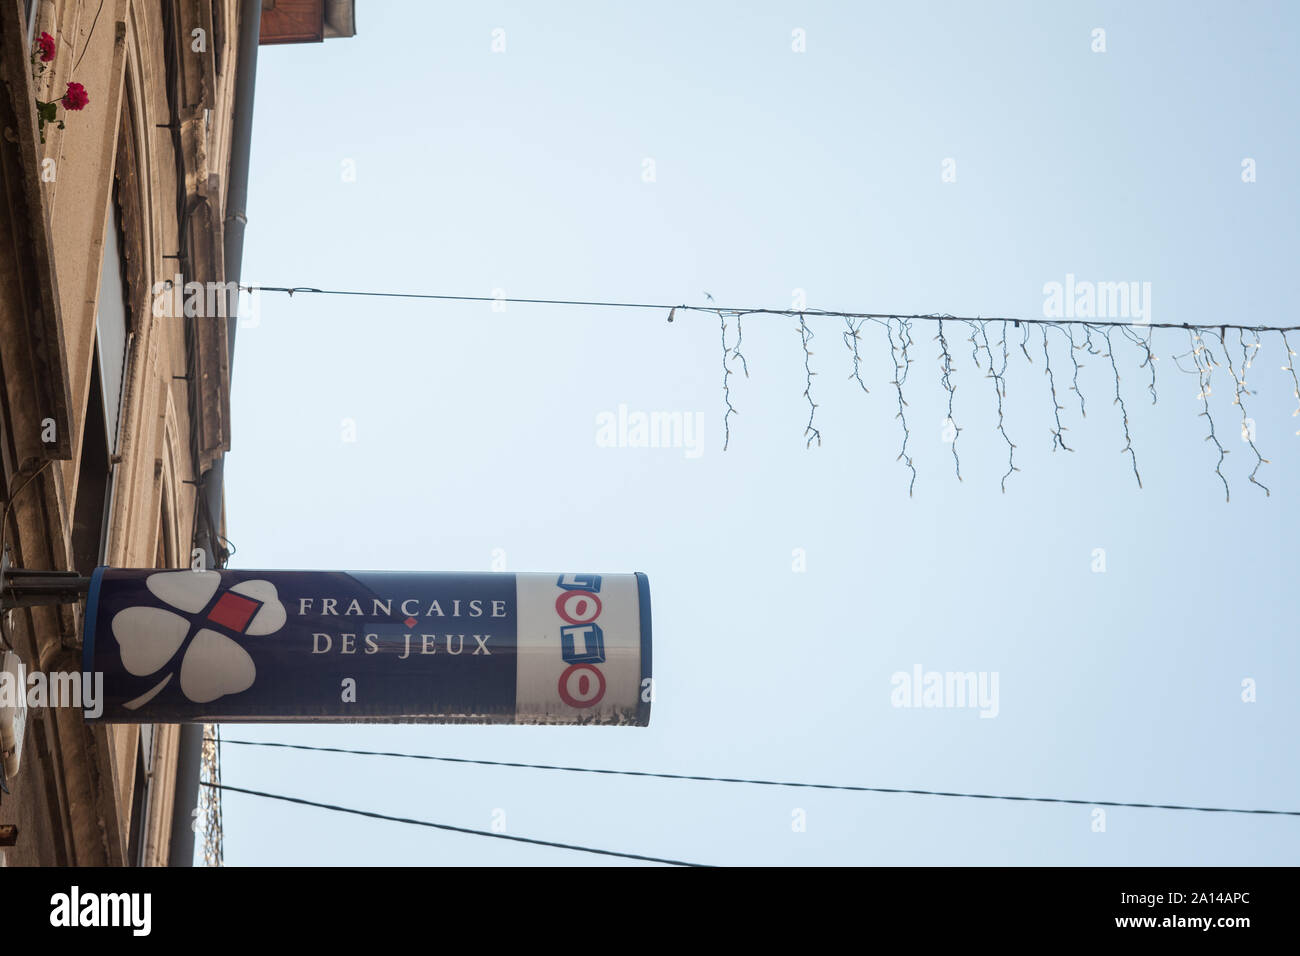 LYON, FRANCE - JULY 16, 2019: La Francaise des Jeux logo in front of their local retailer in Lyon. Also called FDJ, la Francaise des jeux is the gambl Stock Photo